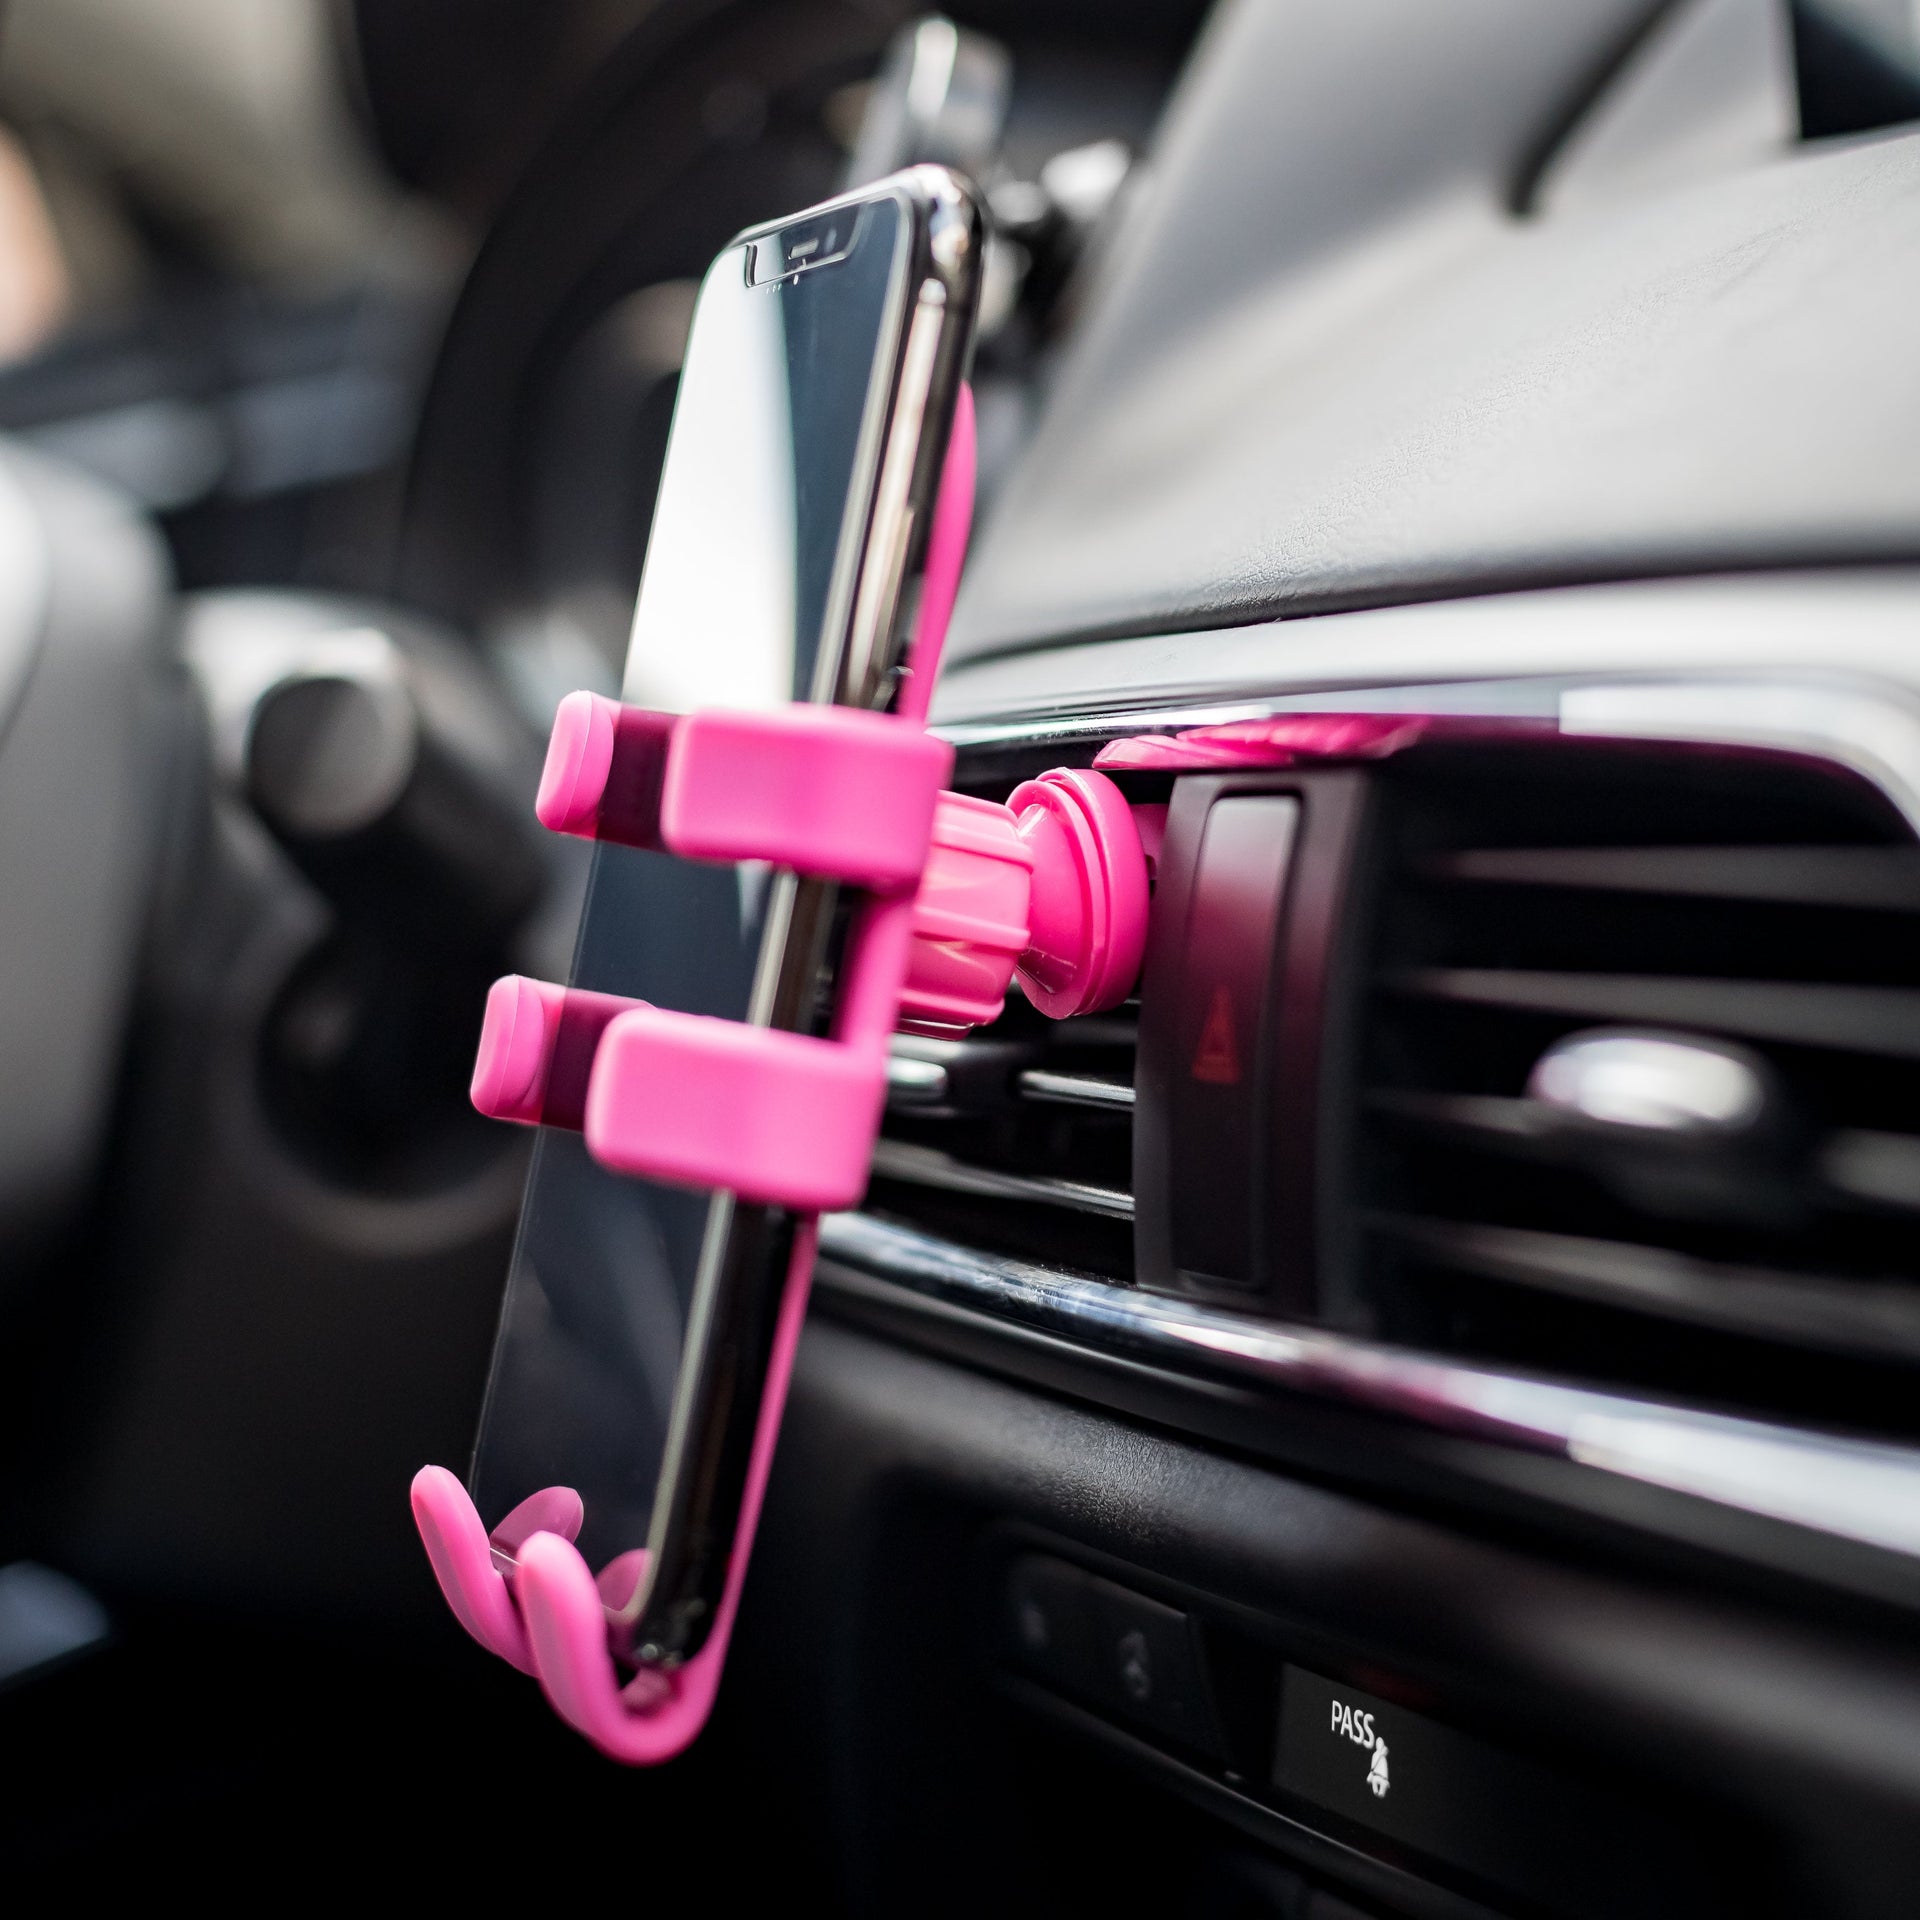 Image of OG Pink Hug Buddy holding a cell phone while attached to a vehicle air vent with a close up on the vent clip